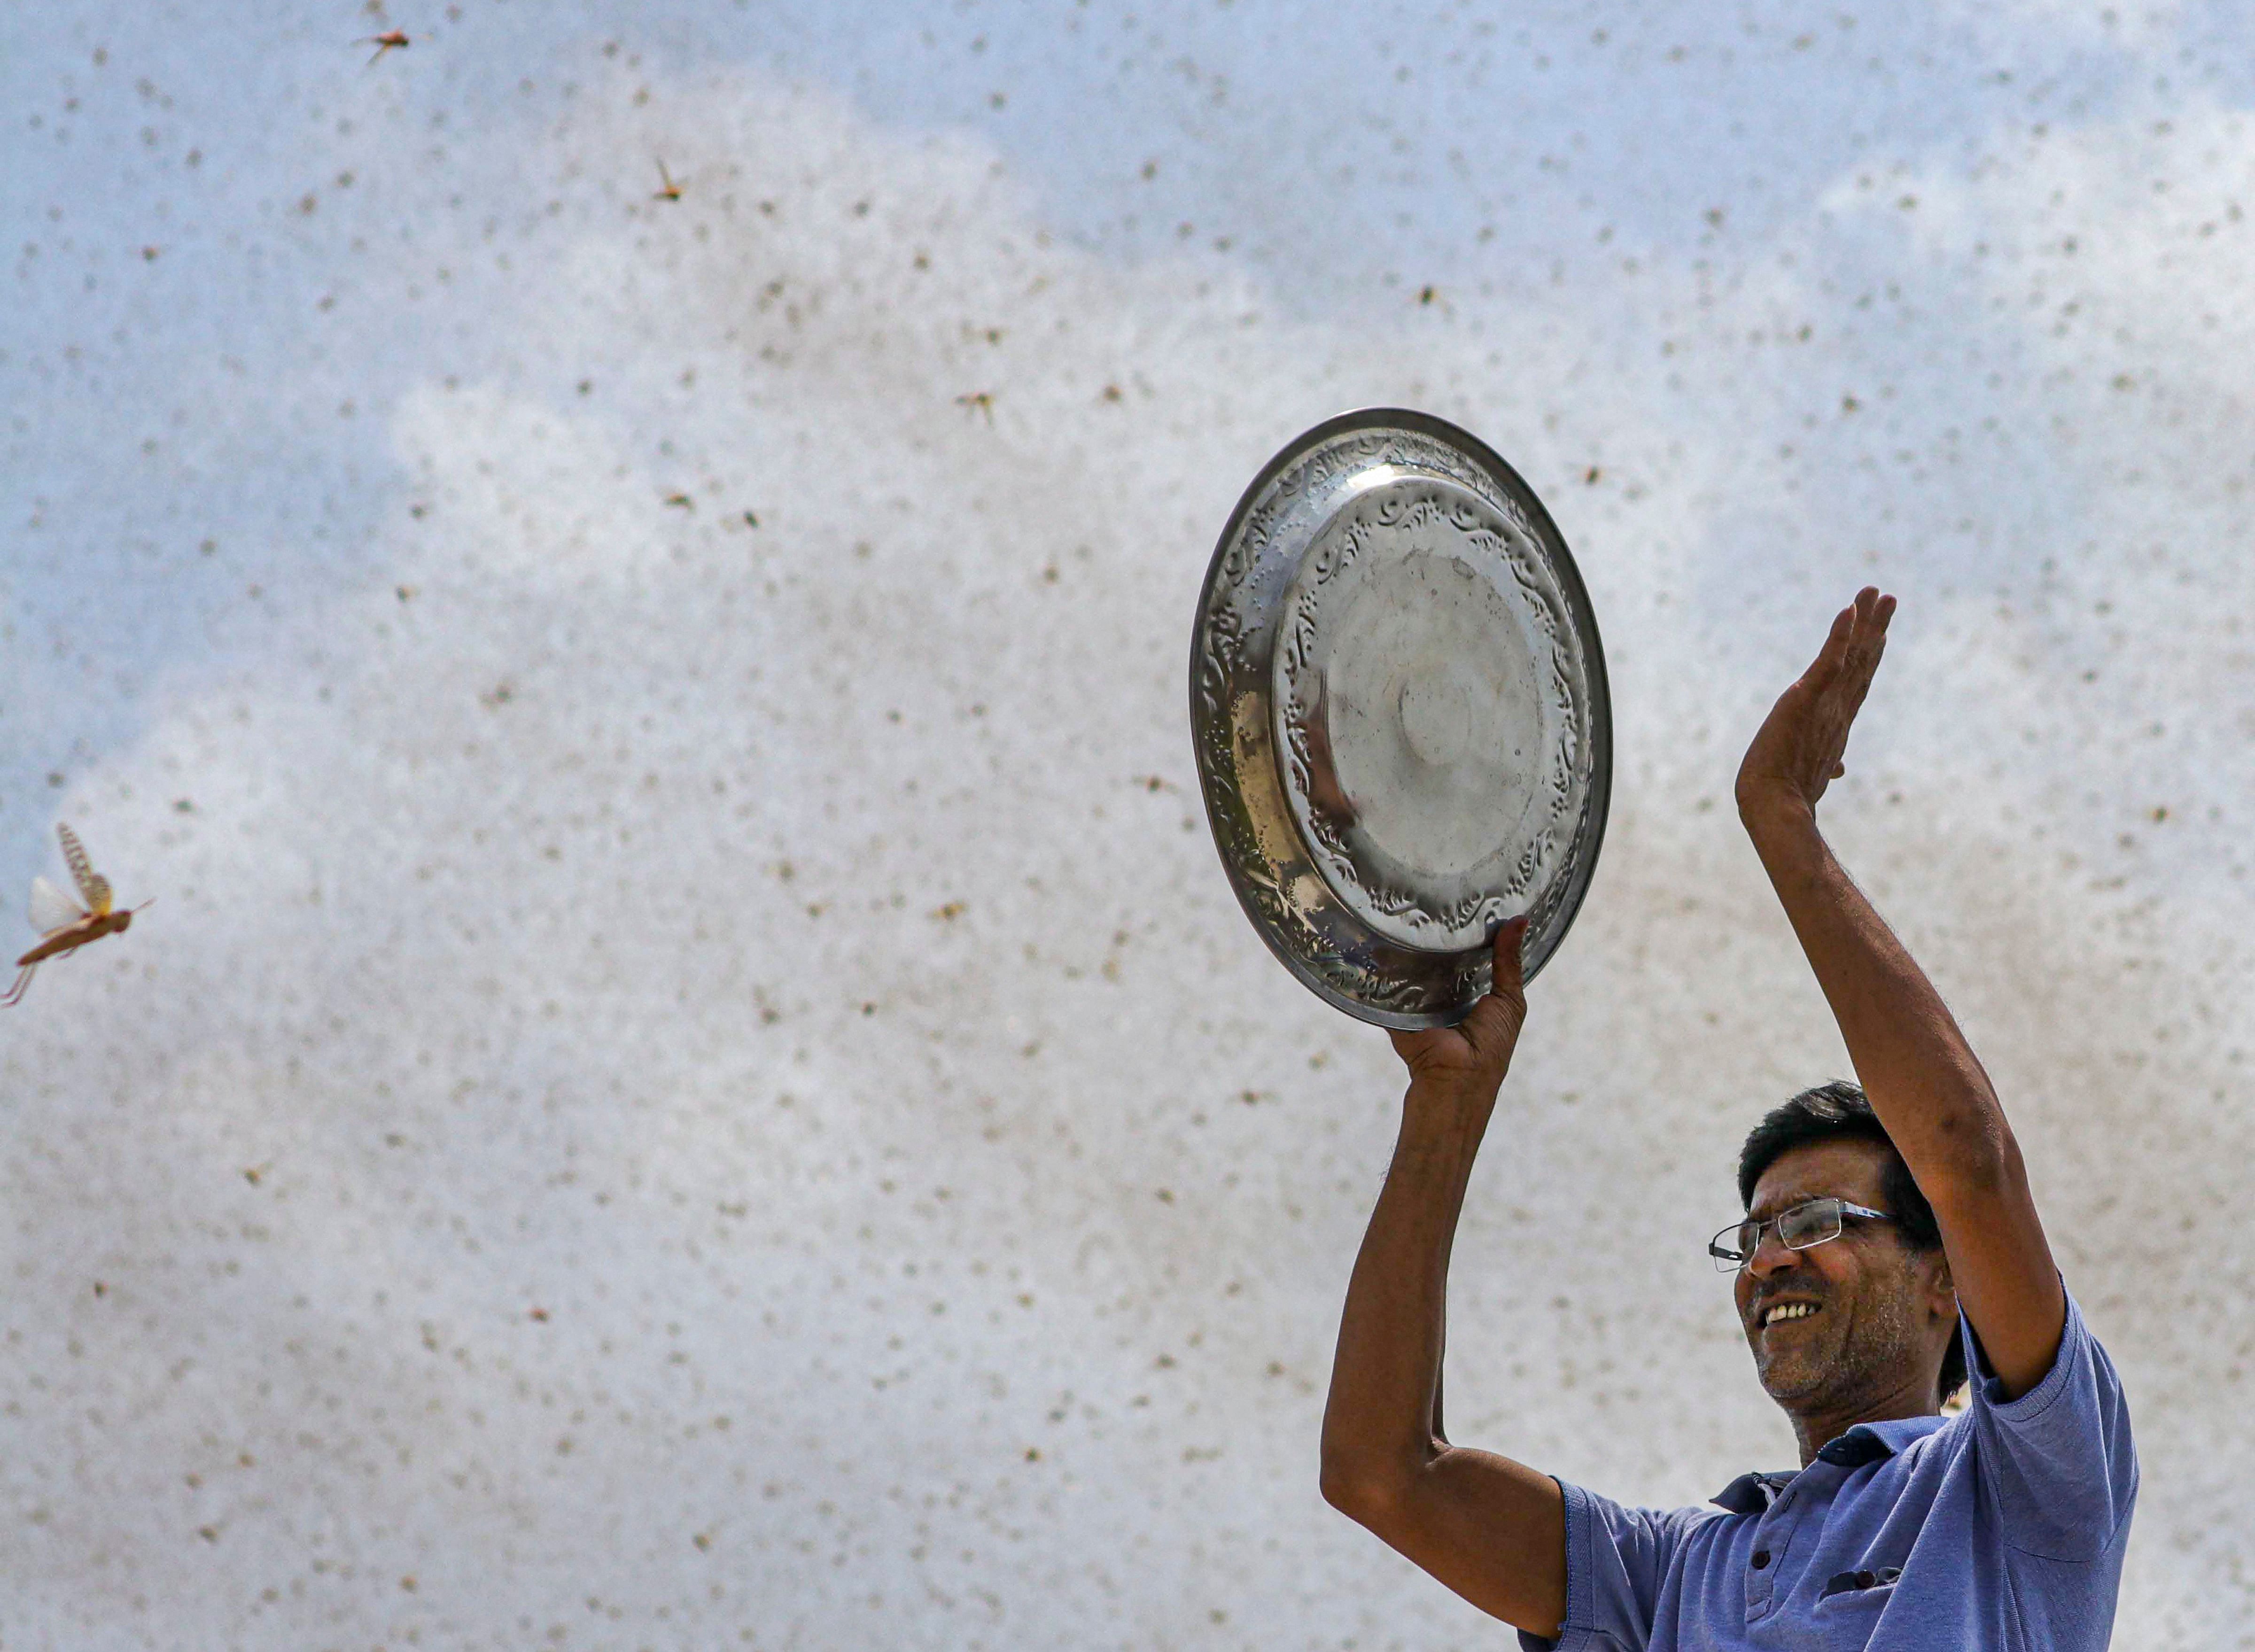  A man beats a utensil to drive away a swarm of locusts, during the total lockdown imposed by the state government for three consecutive days, in Lucknow. Credits: PTI Photo